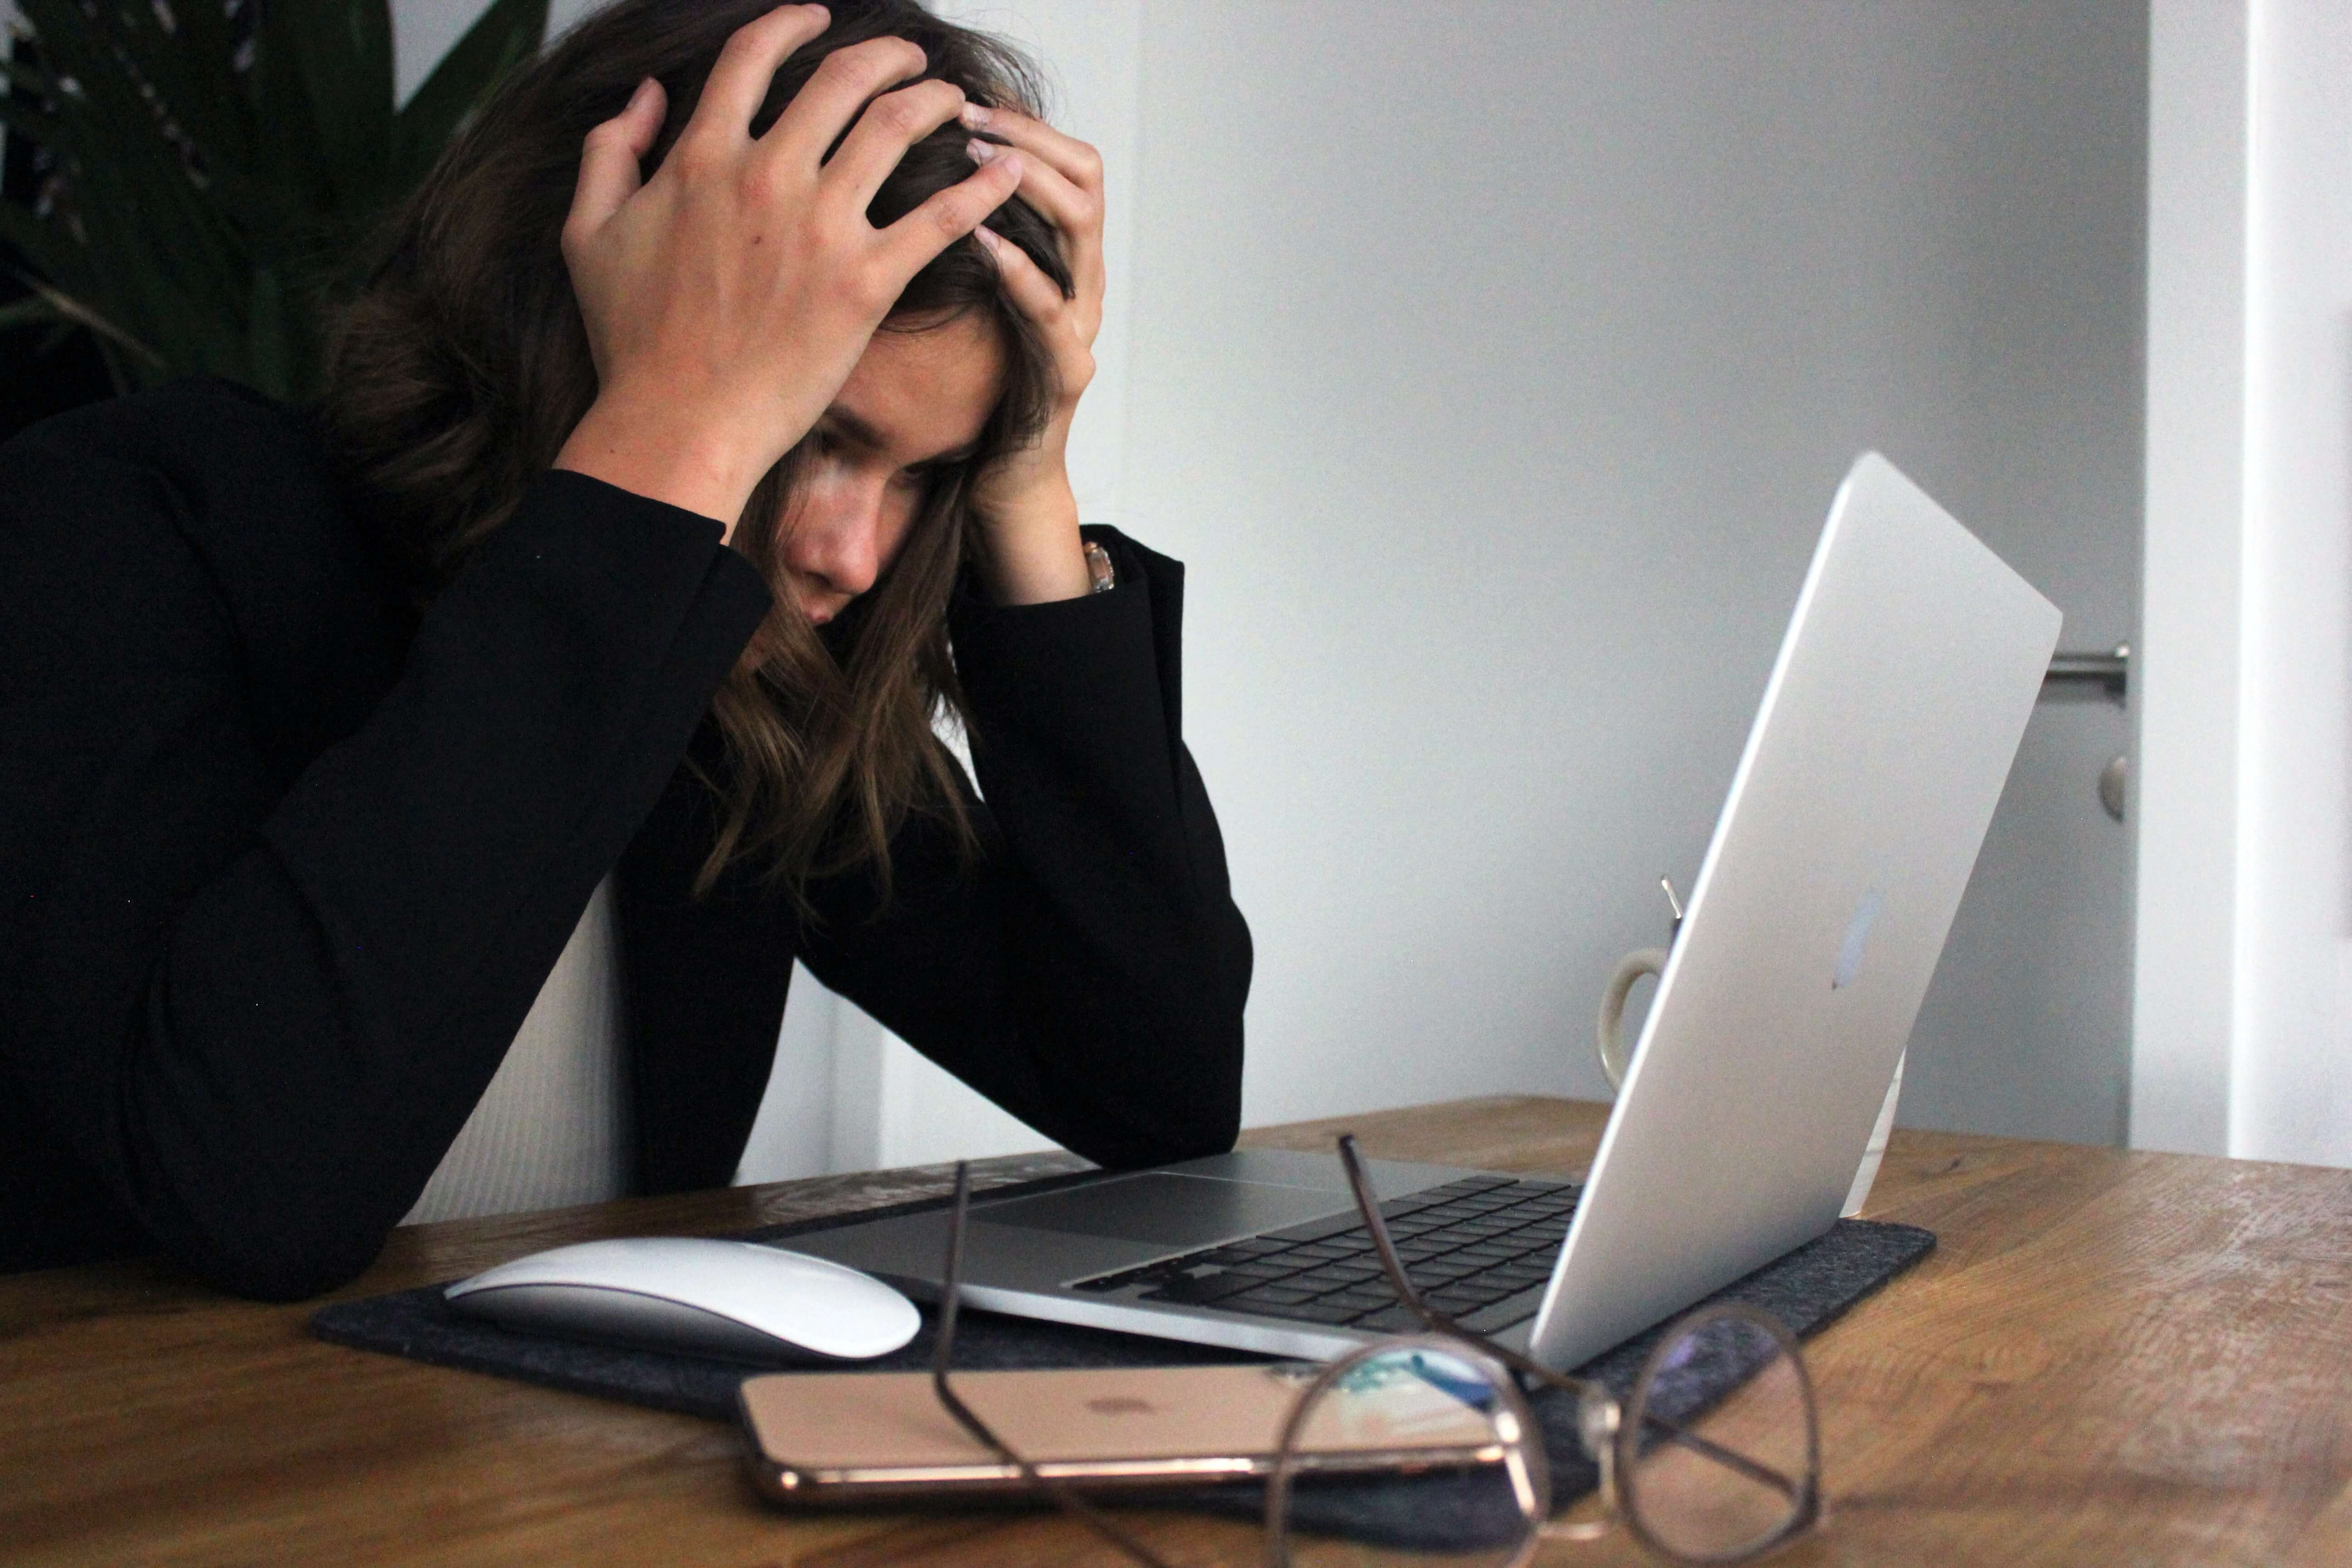 A woman using a computer with an exasperated expression